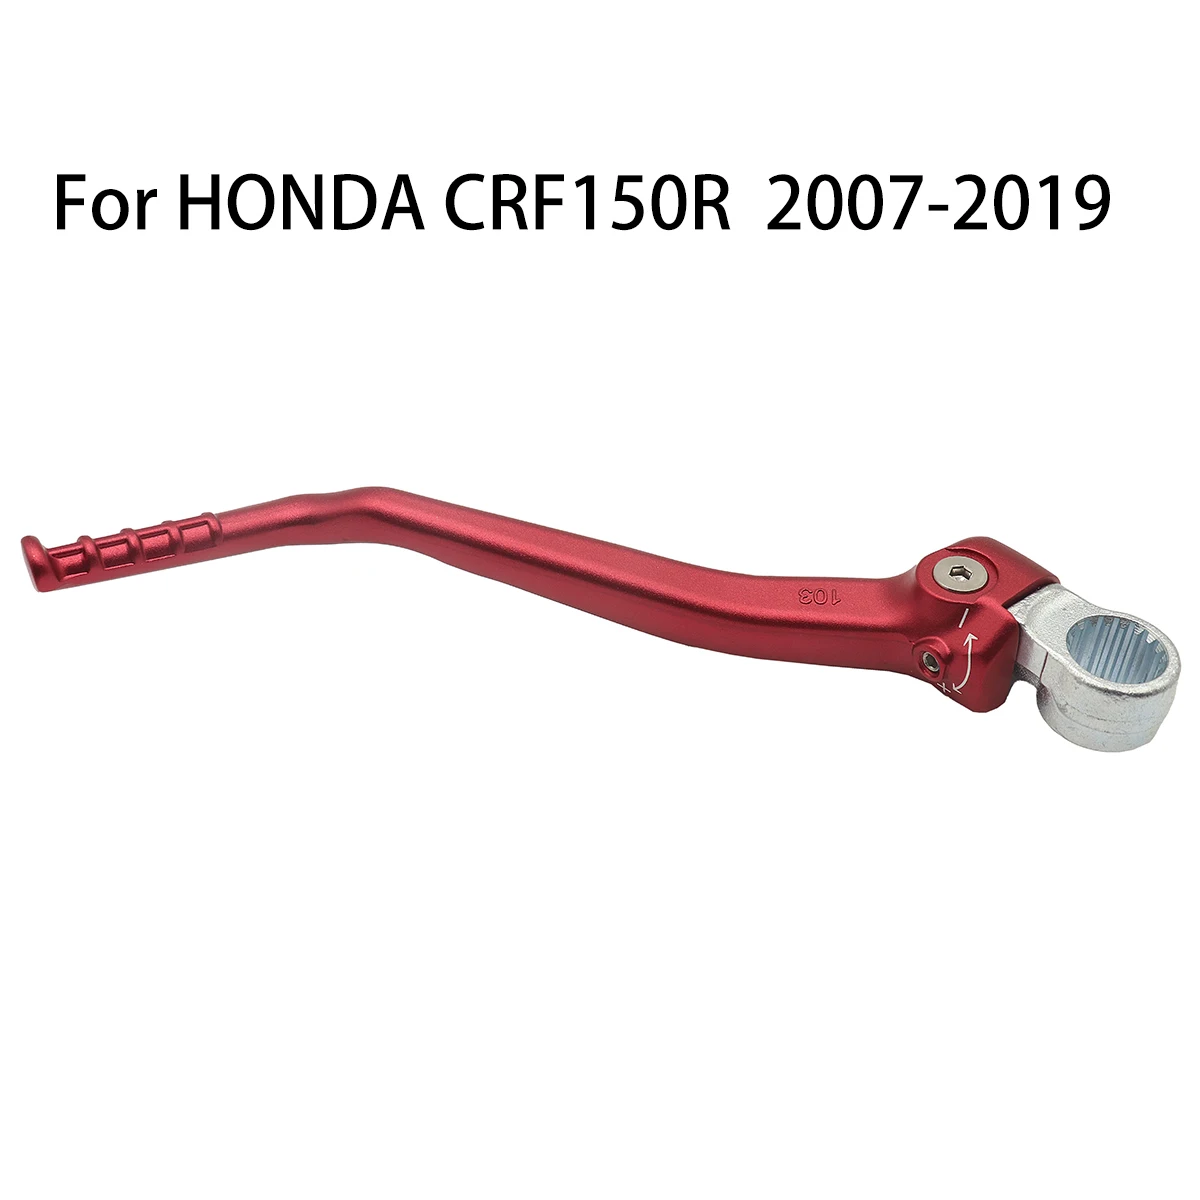 

Motorcycle Forged Kick Start Starter Lever Pedal For HONDA CRF150R CRF250R CRF450R CRF 150R 250R 450R 2007-2017 2018 2109 2020